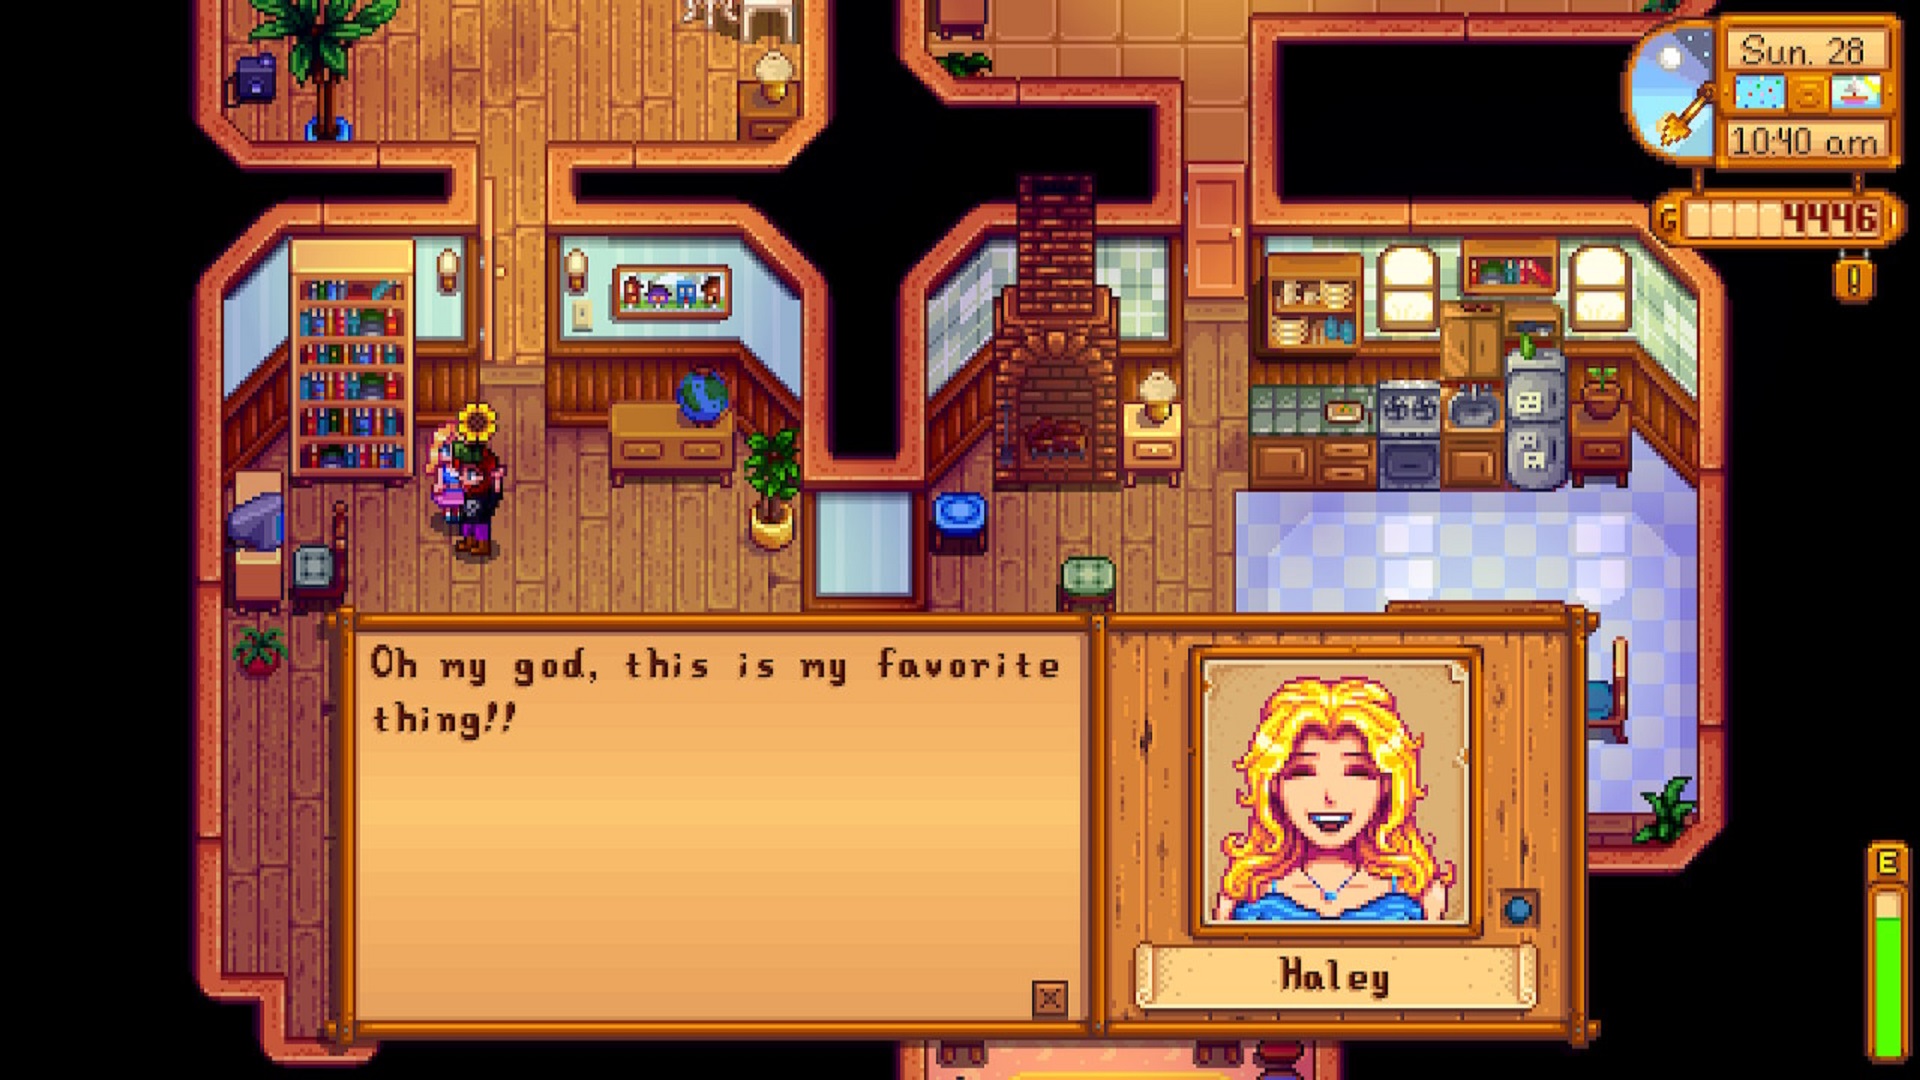 stardew-valley-haley-gifts-schedule-and-heart-events-ggrecon